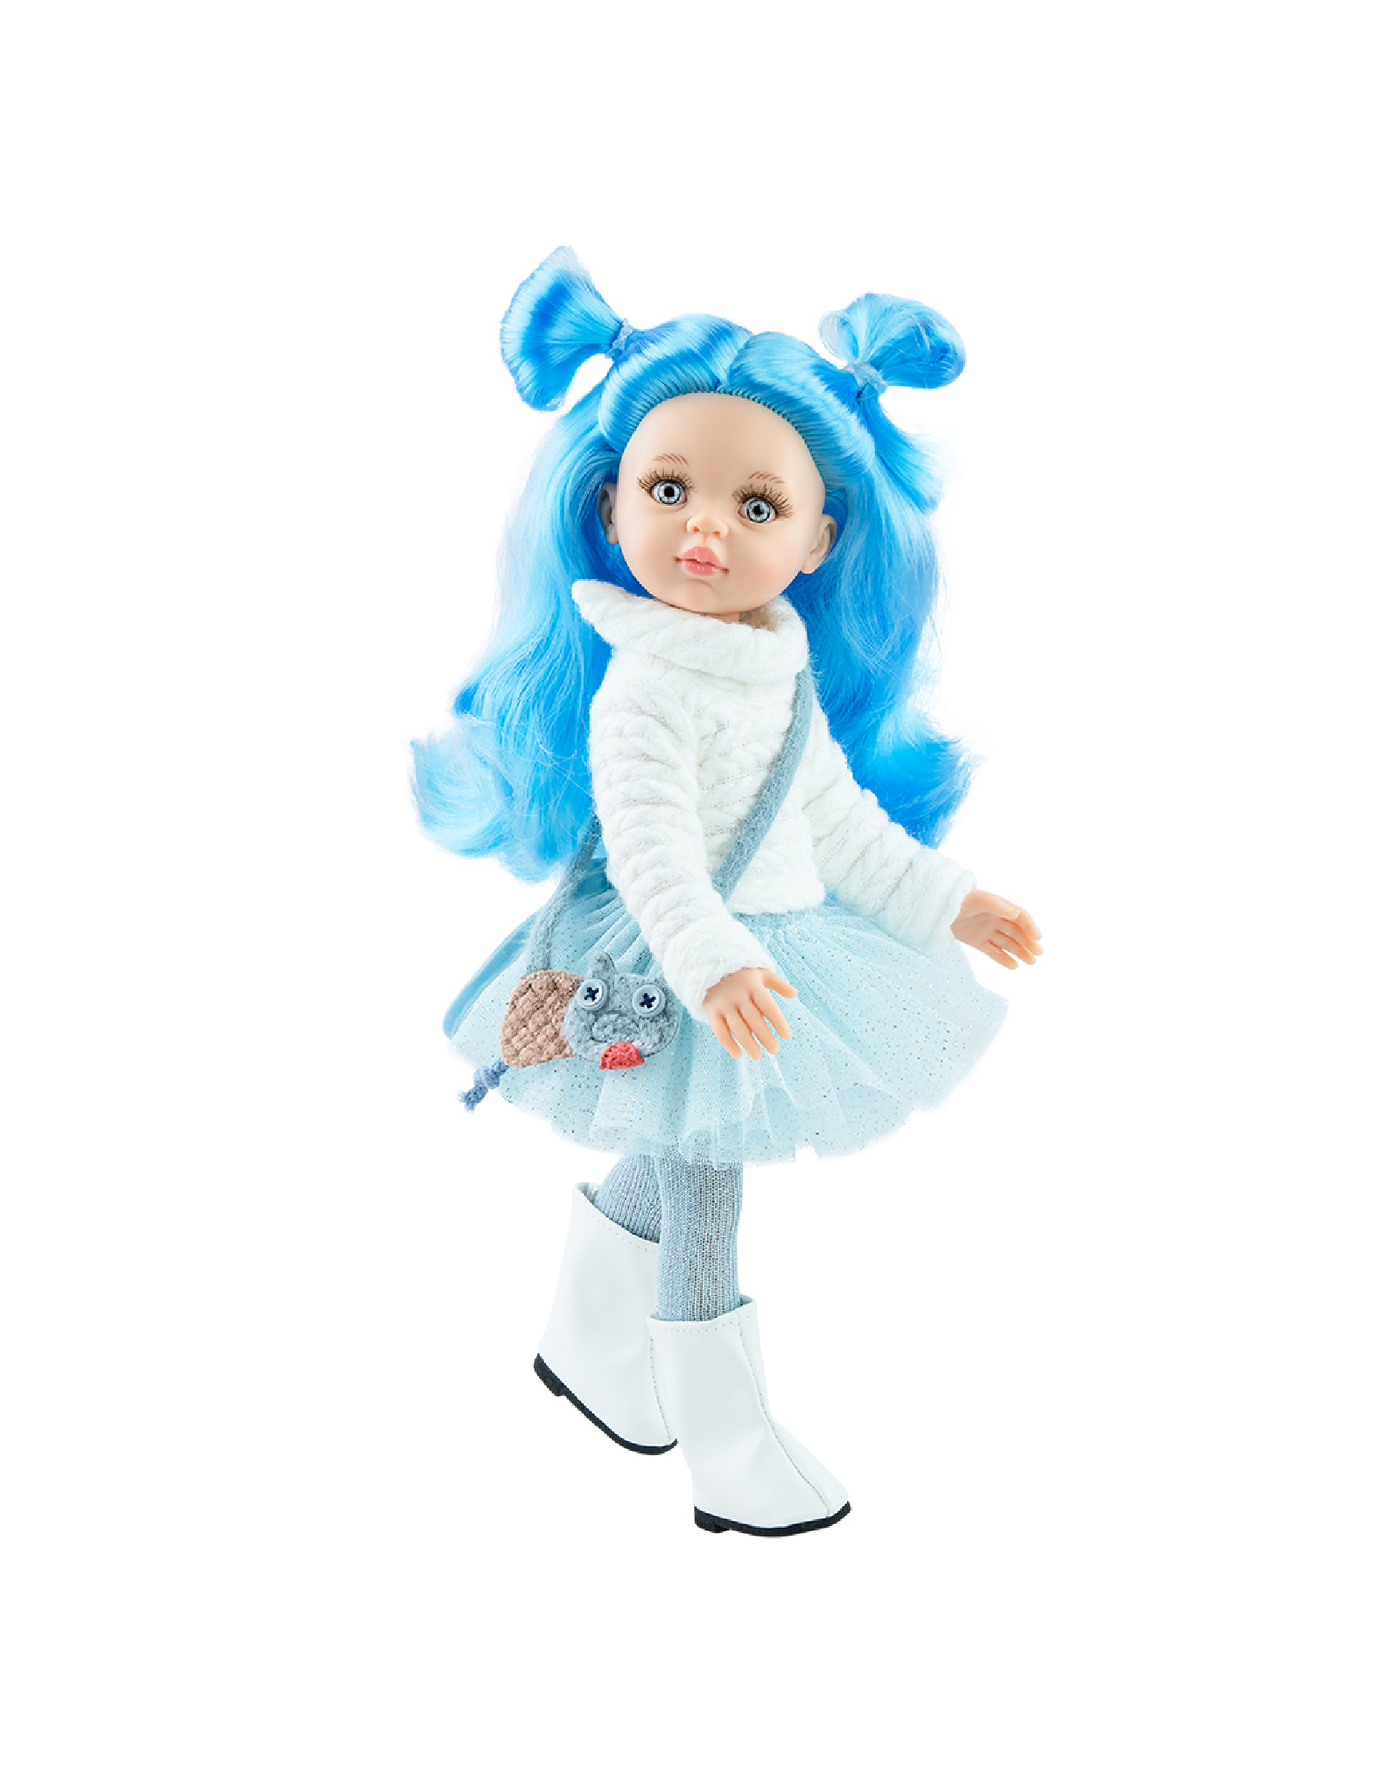 Las Amigas Doll - Nieves with skirt and blue hair - Paola Reina